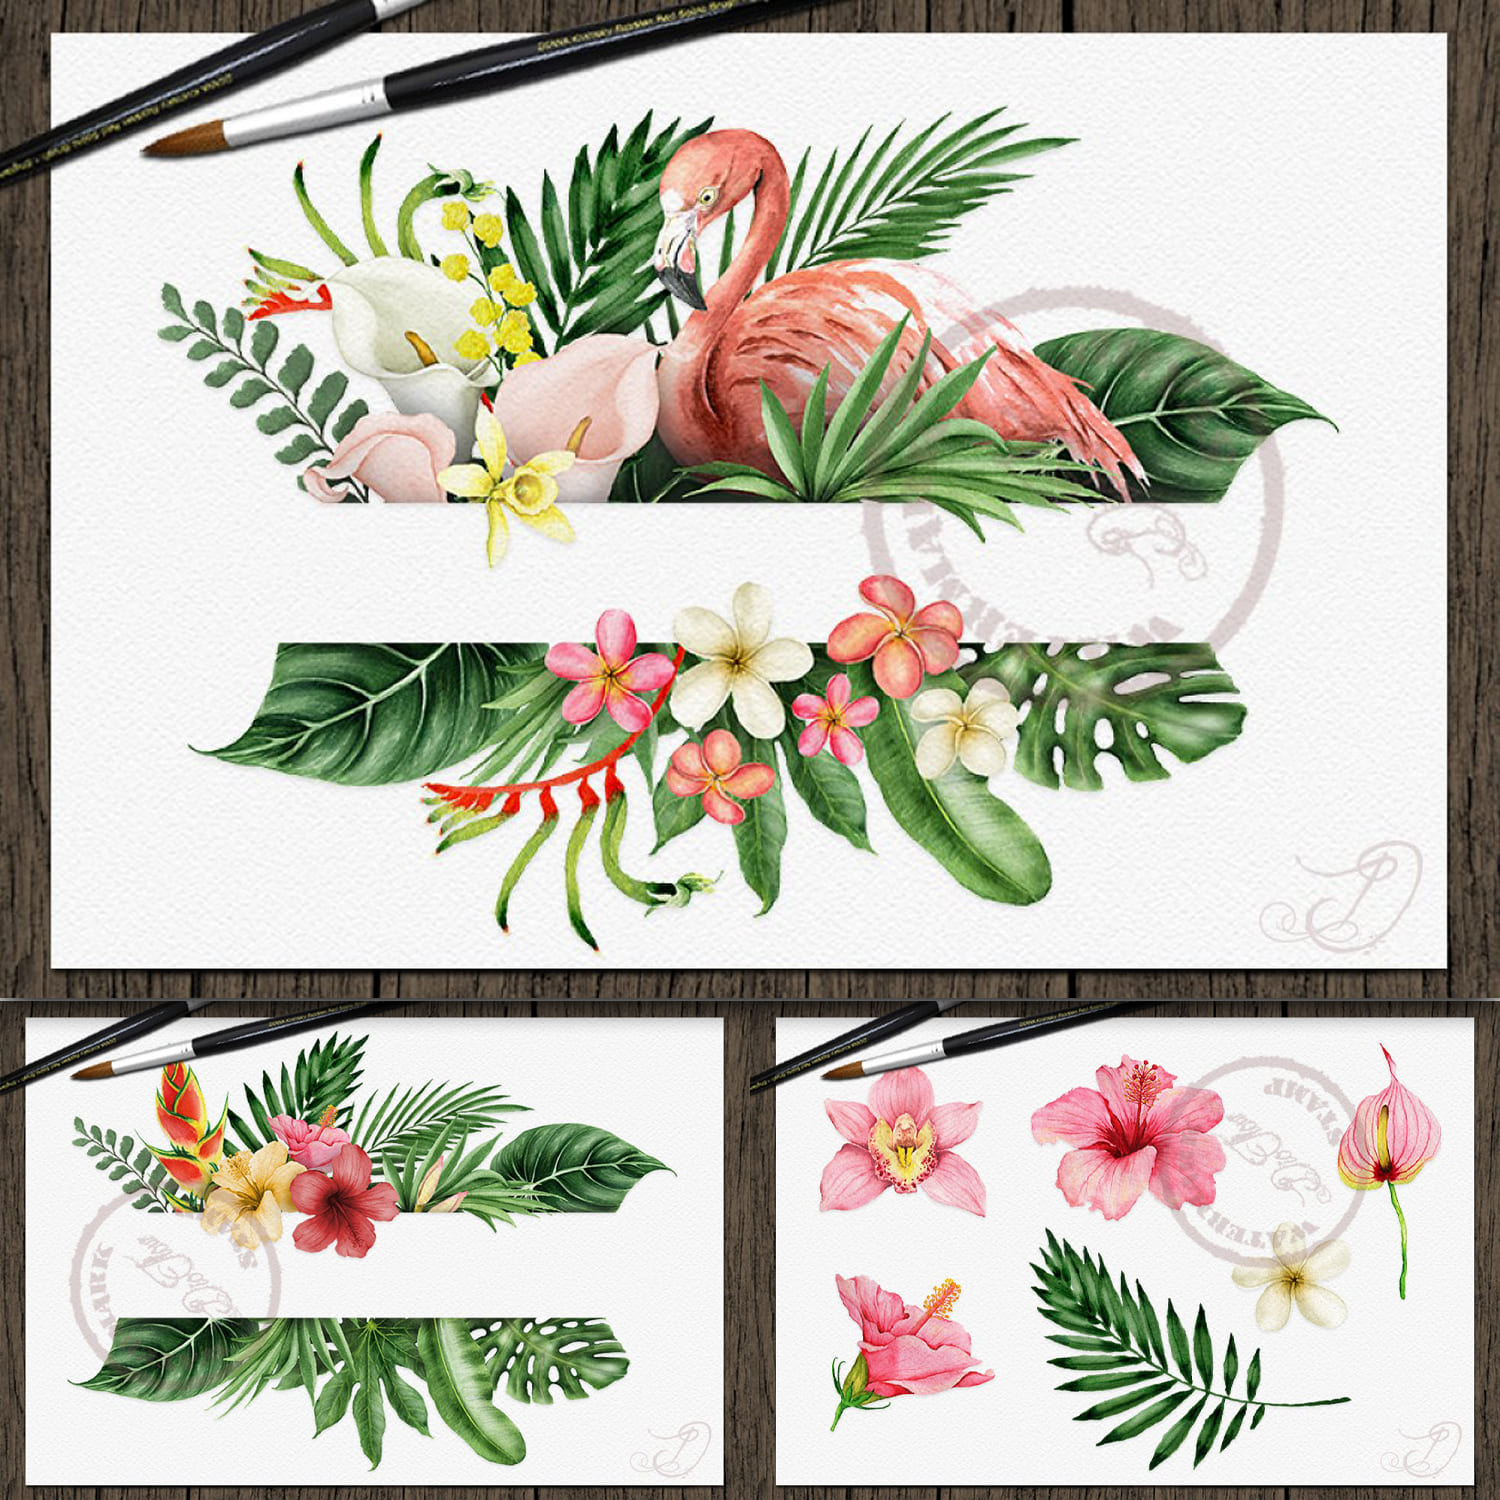 Tropical Selection Watercolor cover.